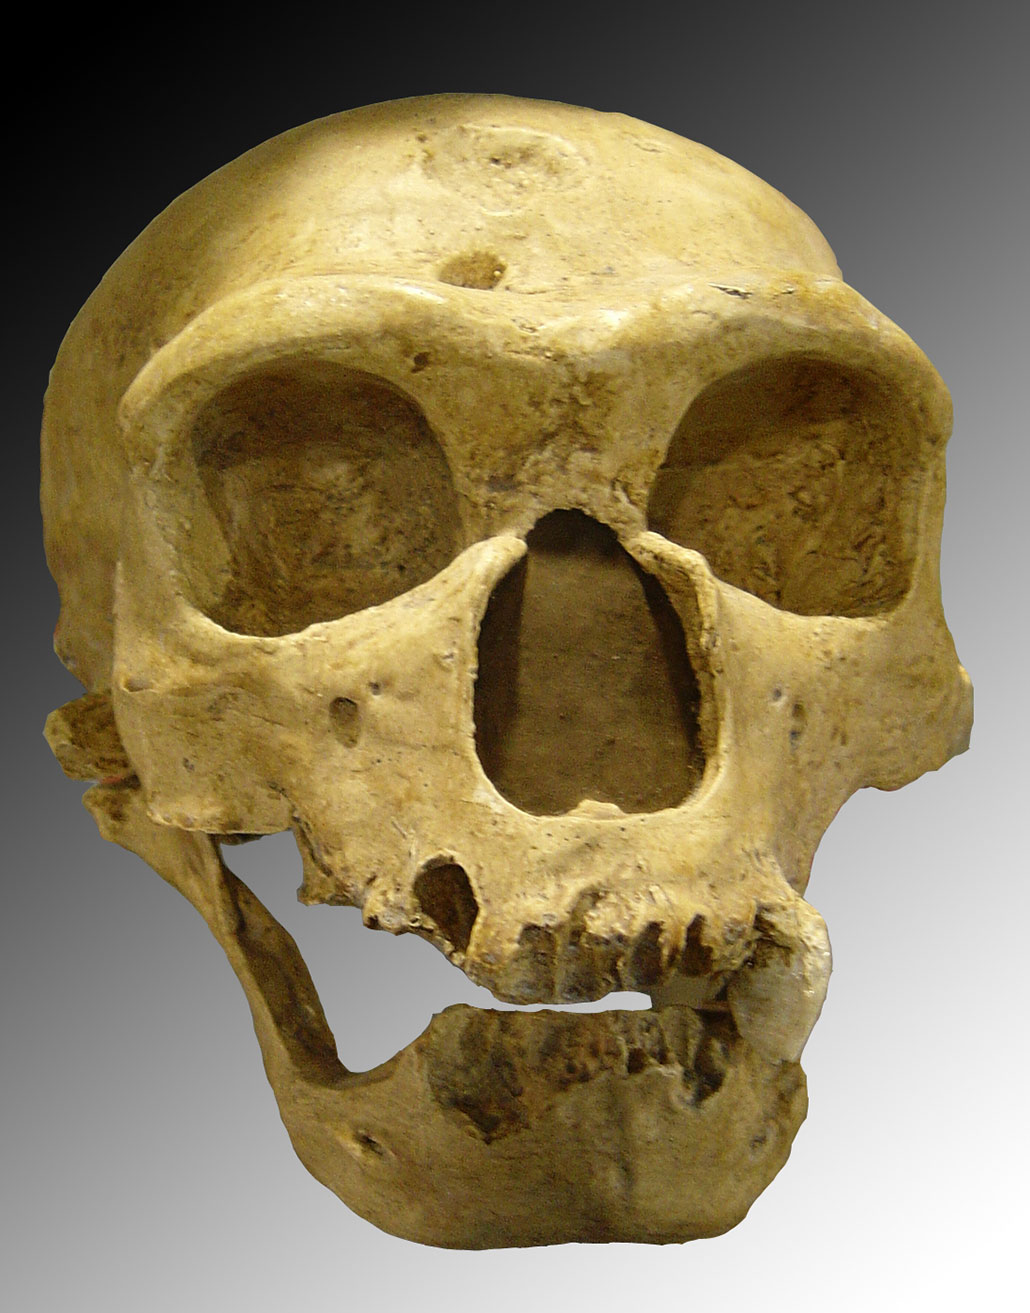 a male Neandertal skull showing missing teeth and damage from gum disease